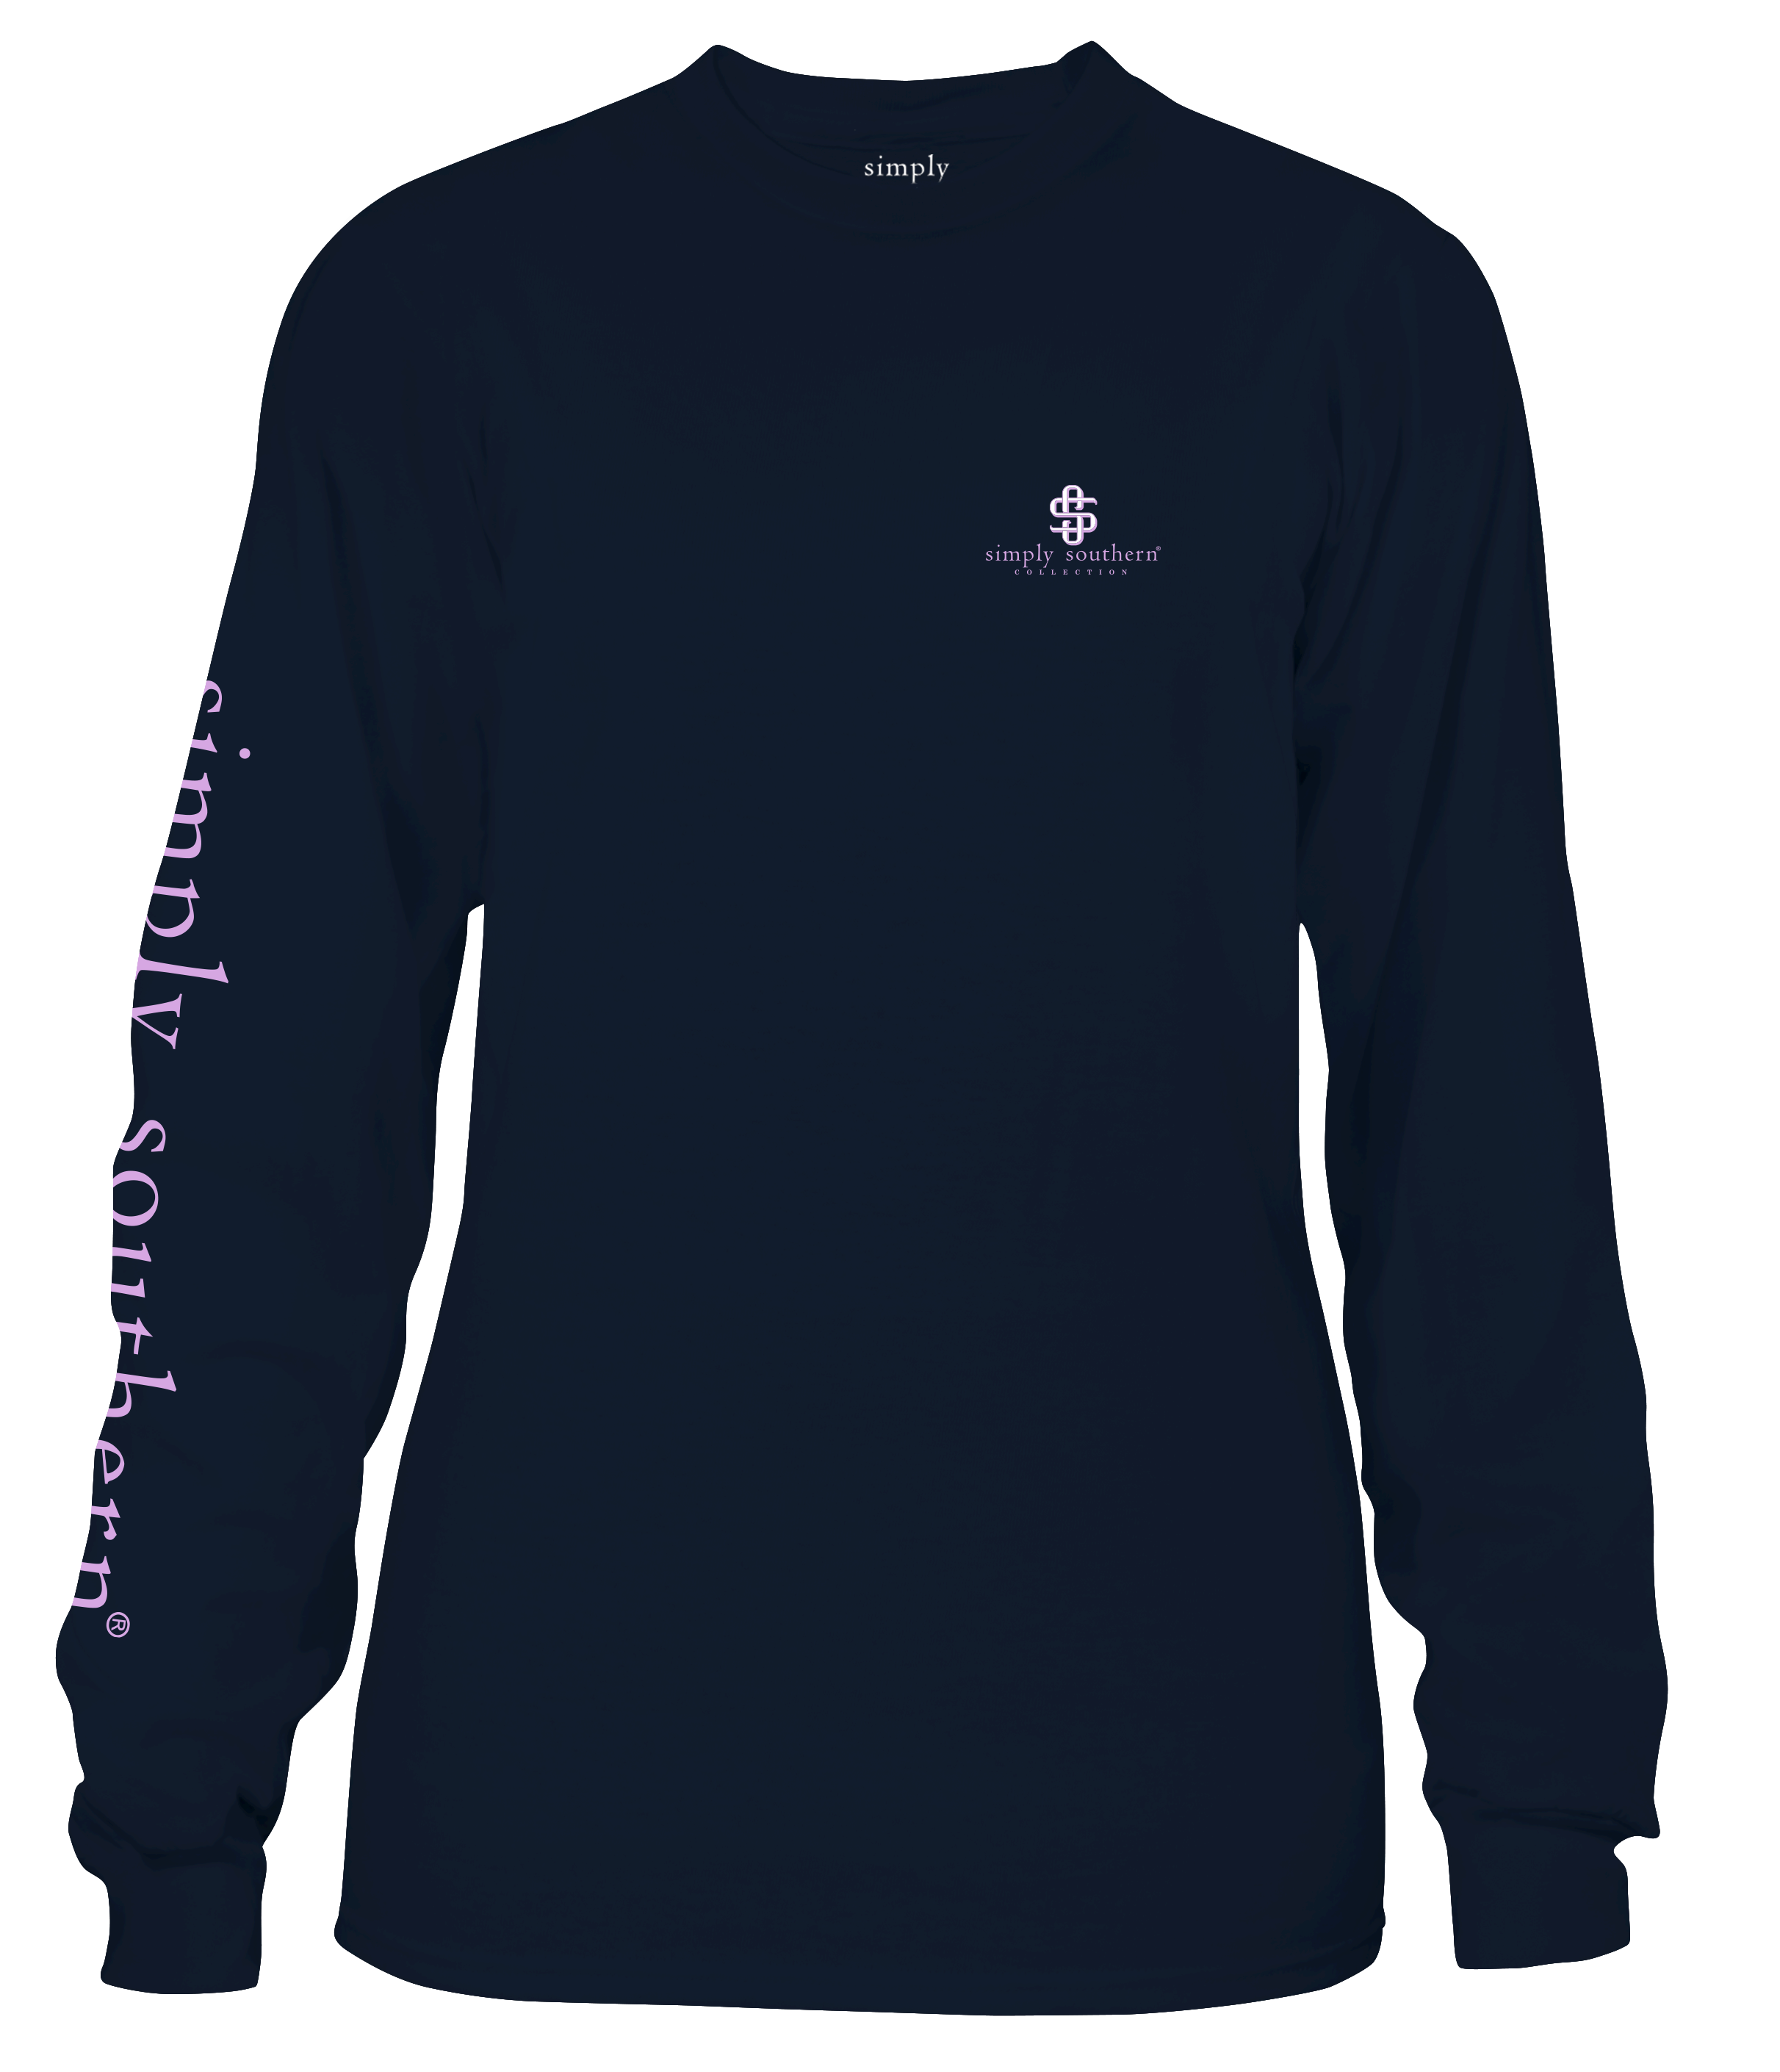 Youth 'Made To Worship' Long Sleeve Tee by Simply Southern